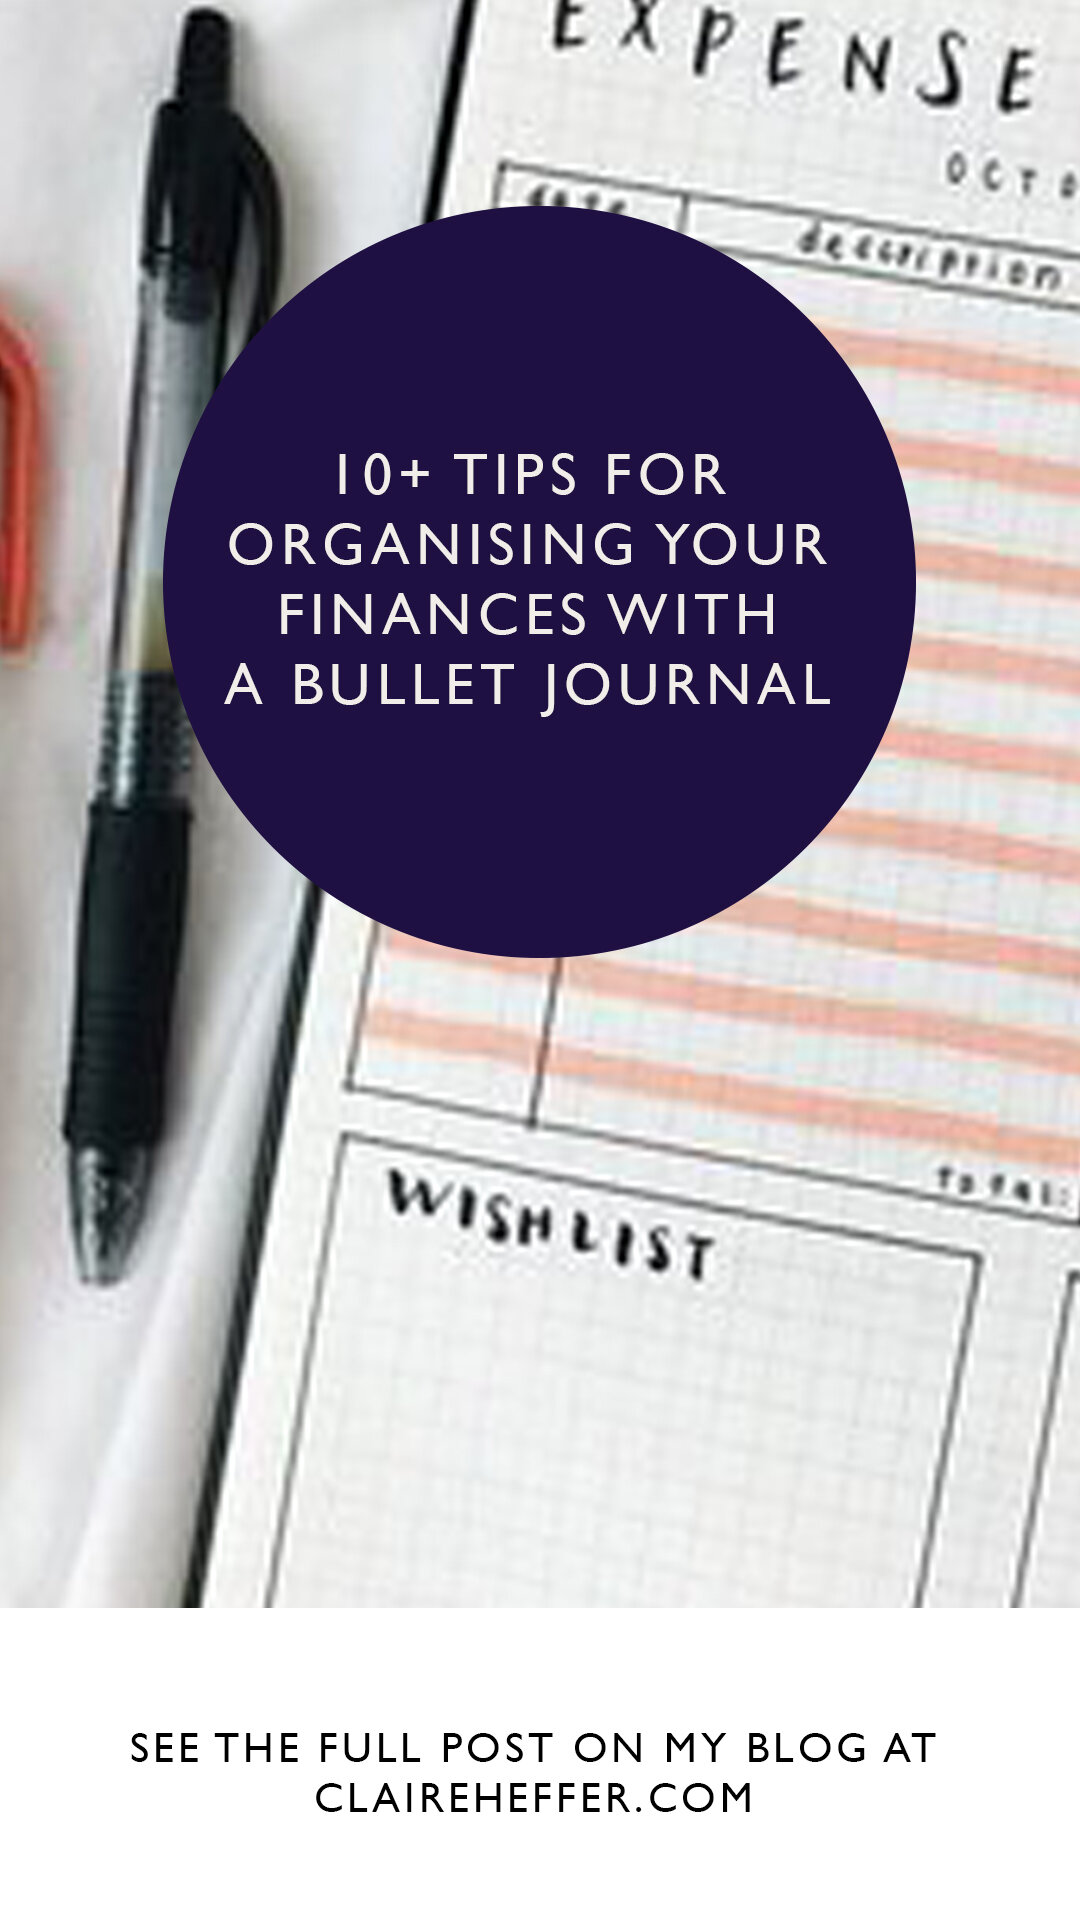 10+ TIPS FOR ORGANISING YOUR FINANCES WITH A BULLET JOURNAL.jpg